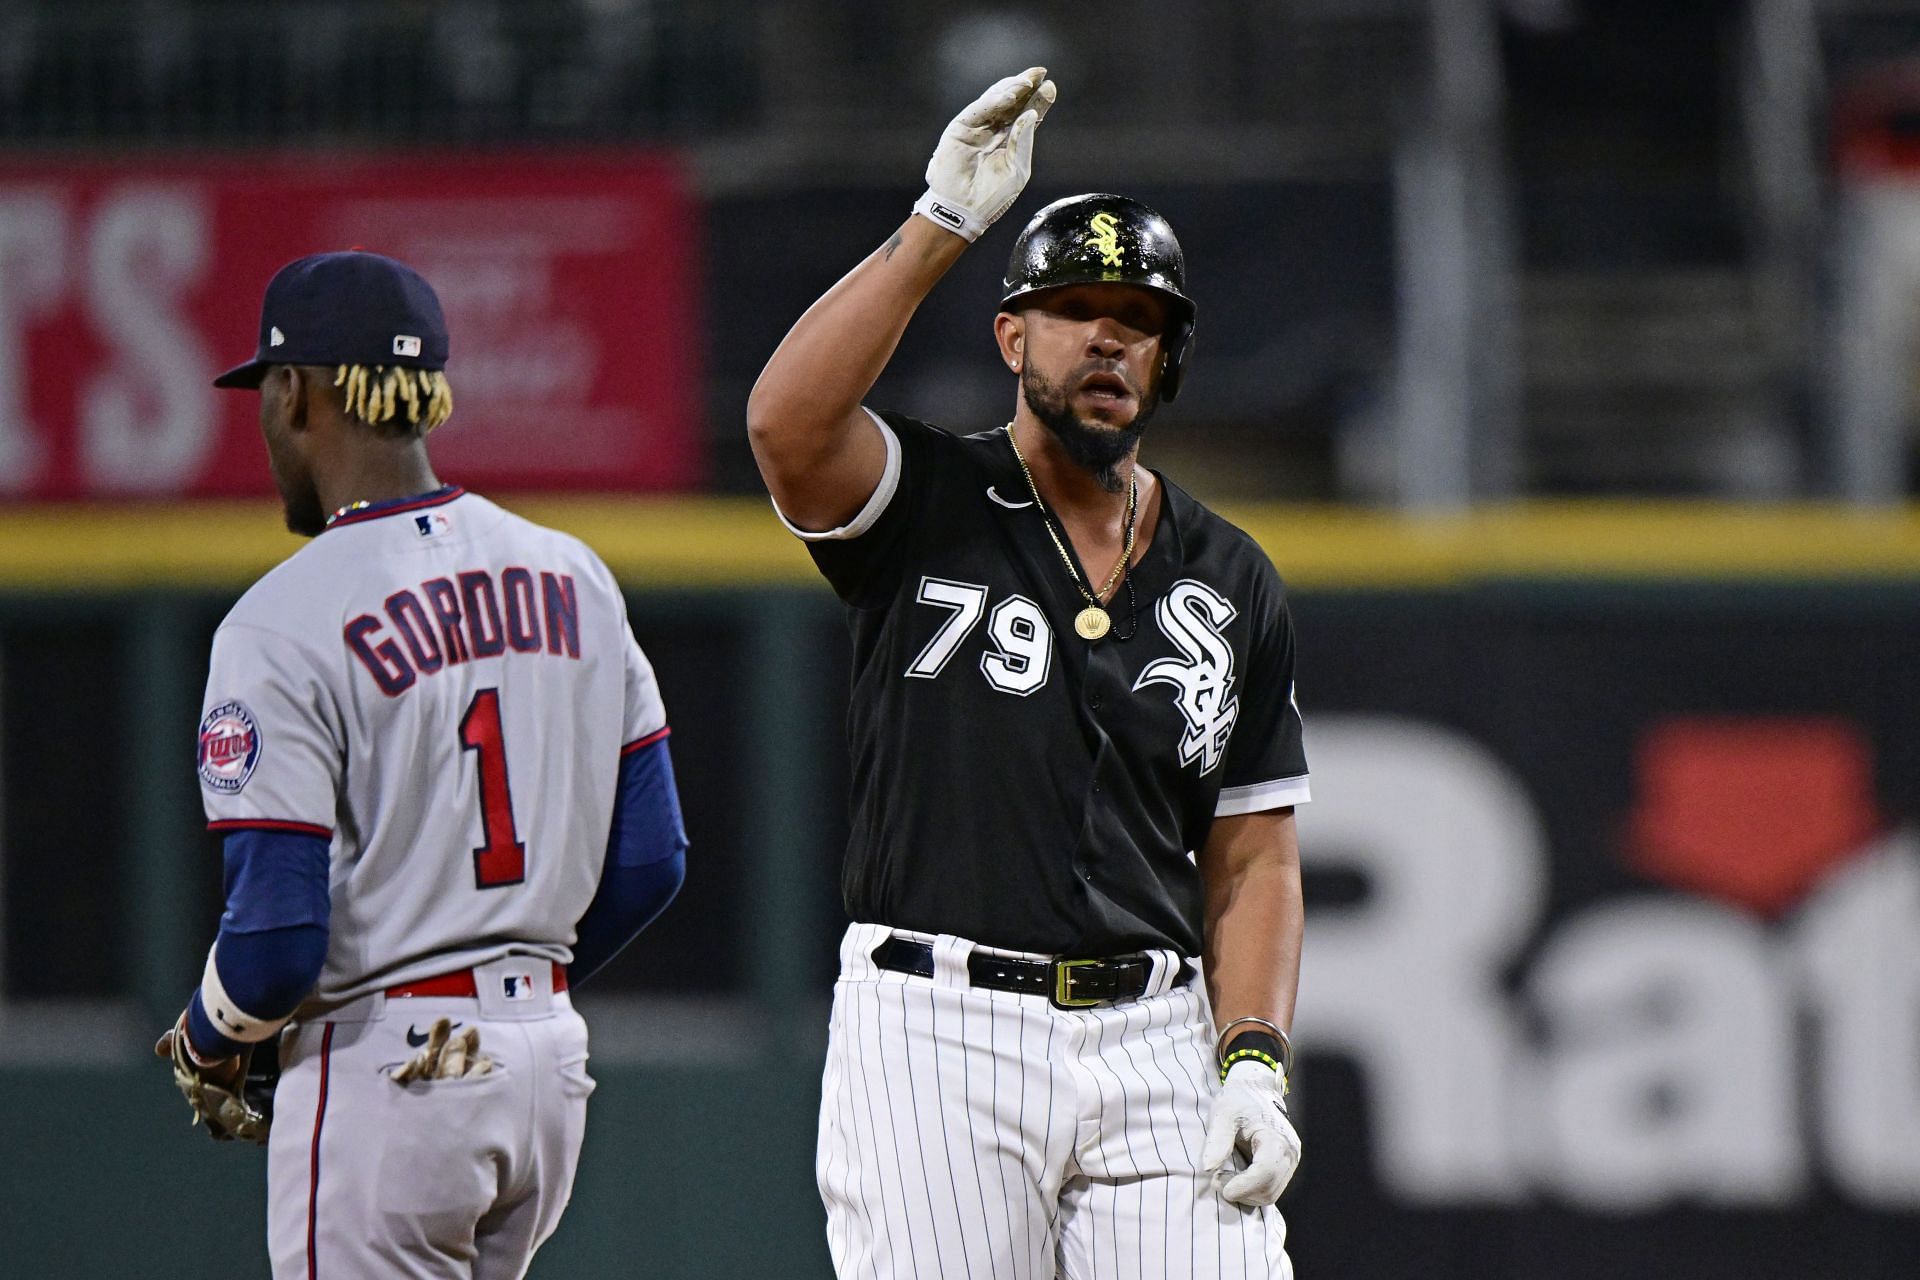 White Sox' Rick Hahn compares Jose Abreu to Michael Jordan in Wizards jersey  – NBC Sports Chicago